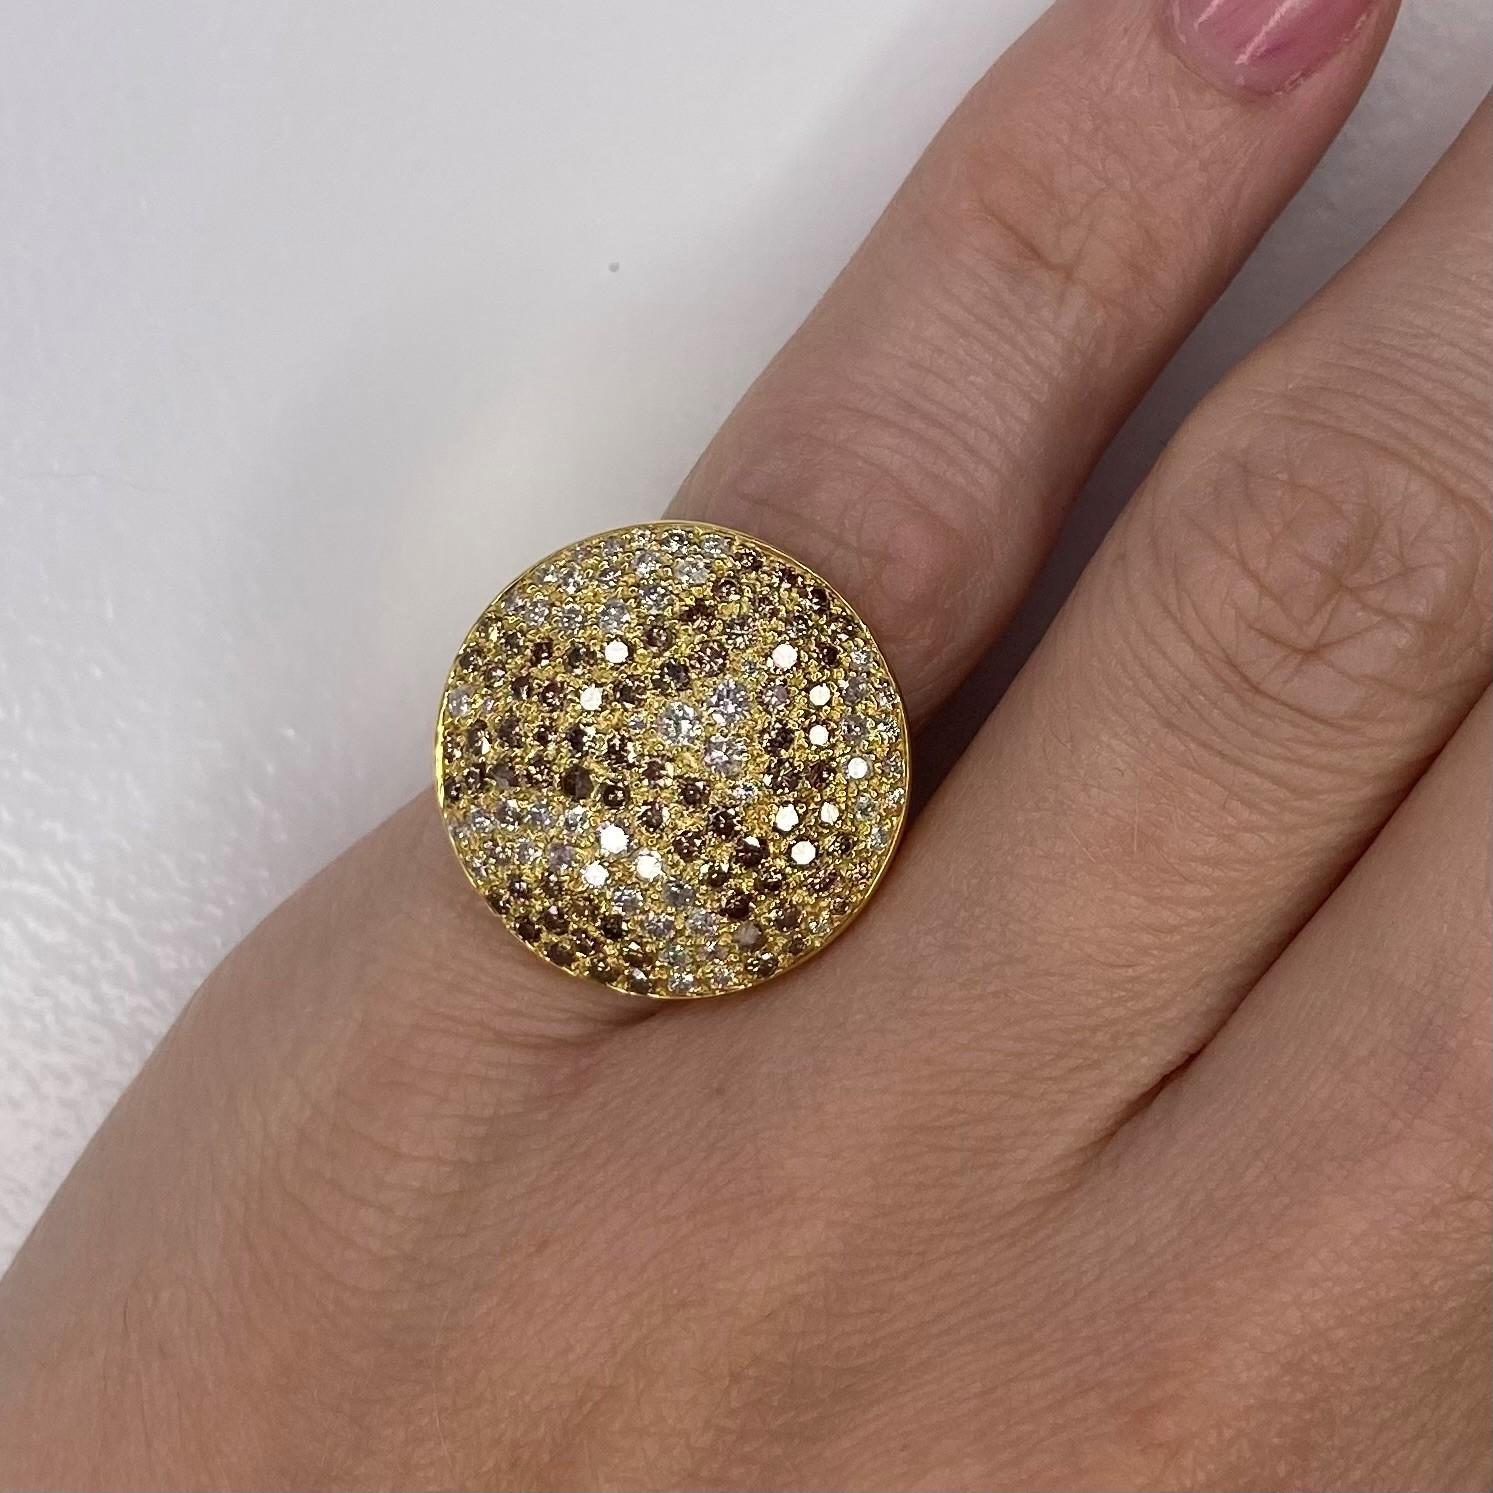 Cartier Paris Jeton Sauvage Cocktail Ring 18Kt Yellow Gold with 3.18 Ctw Diamond In Excellent Condition For Sale In Miami, FL